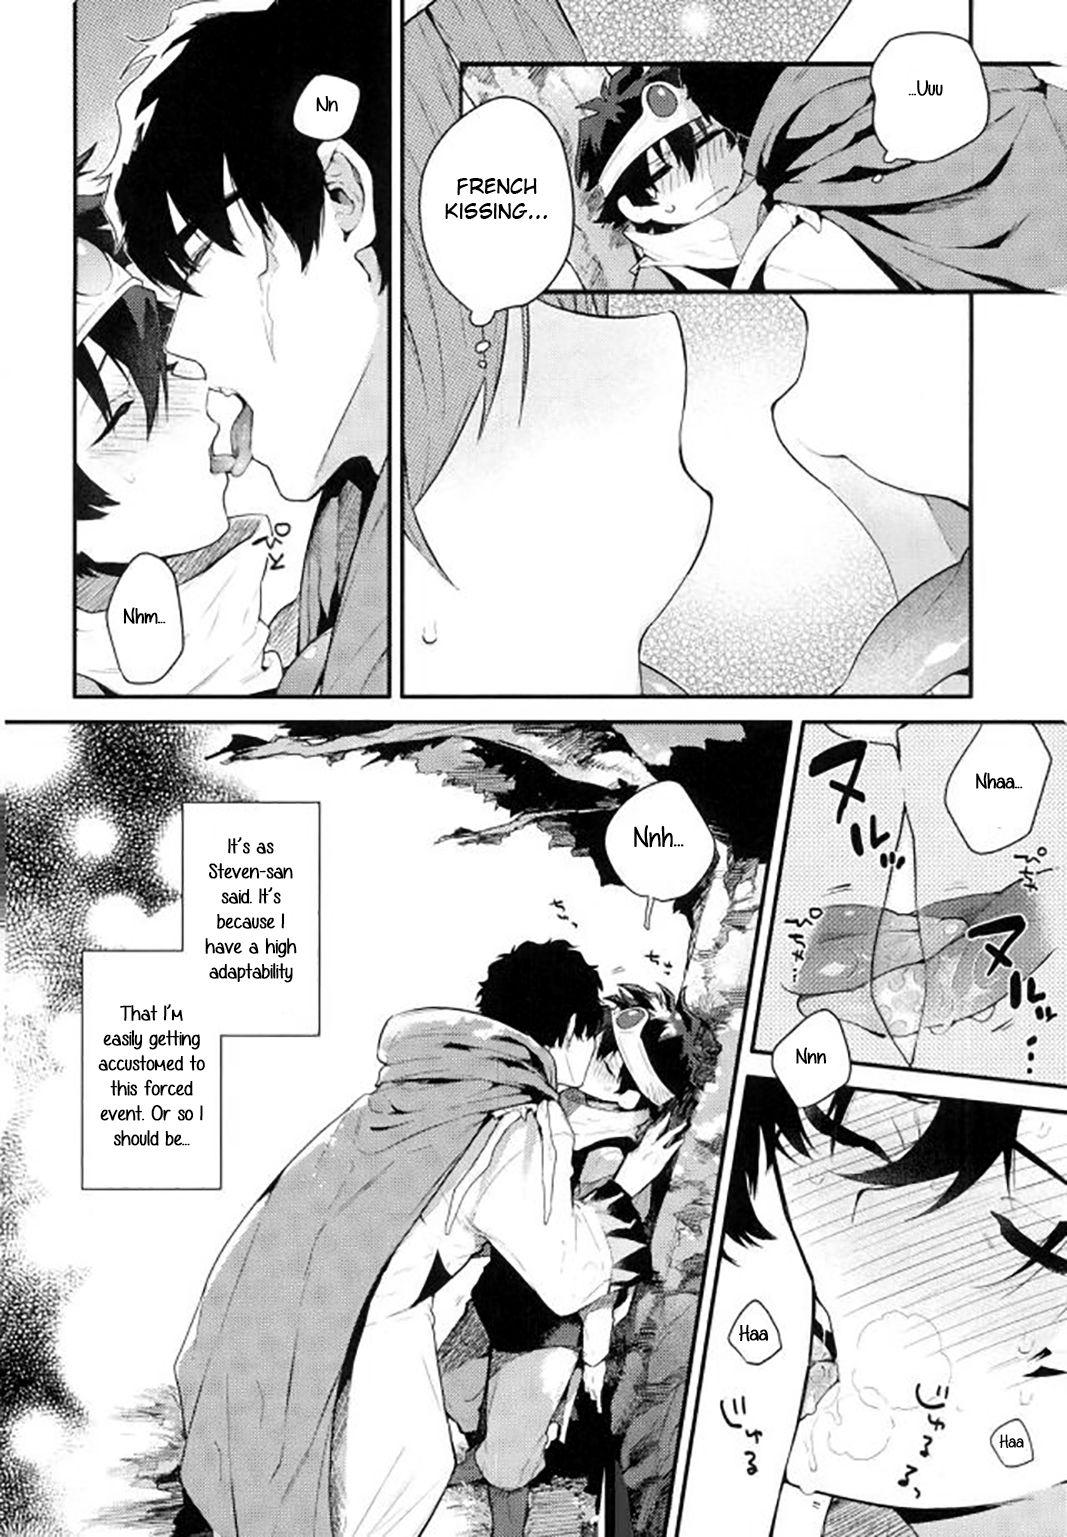 Penis Sucking After Being Sent to Another World I'm Forced to a Love Event With My Boss!? - Kekkai sensen White Chick - Page 7